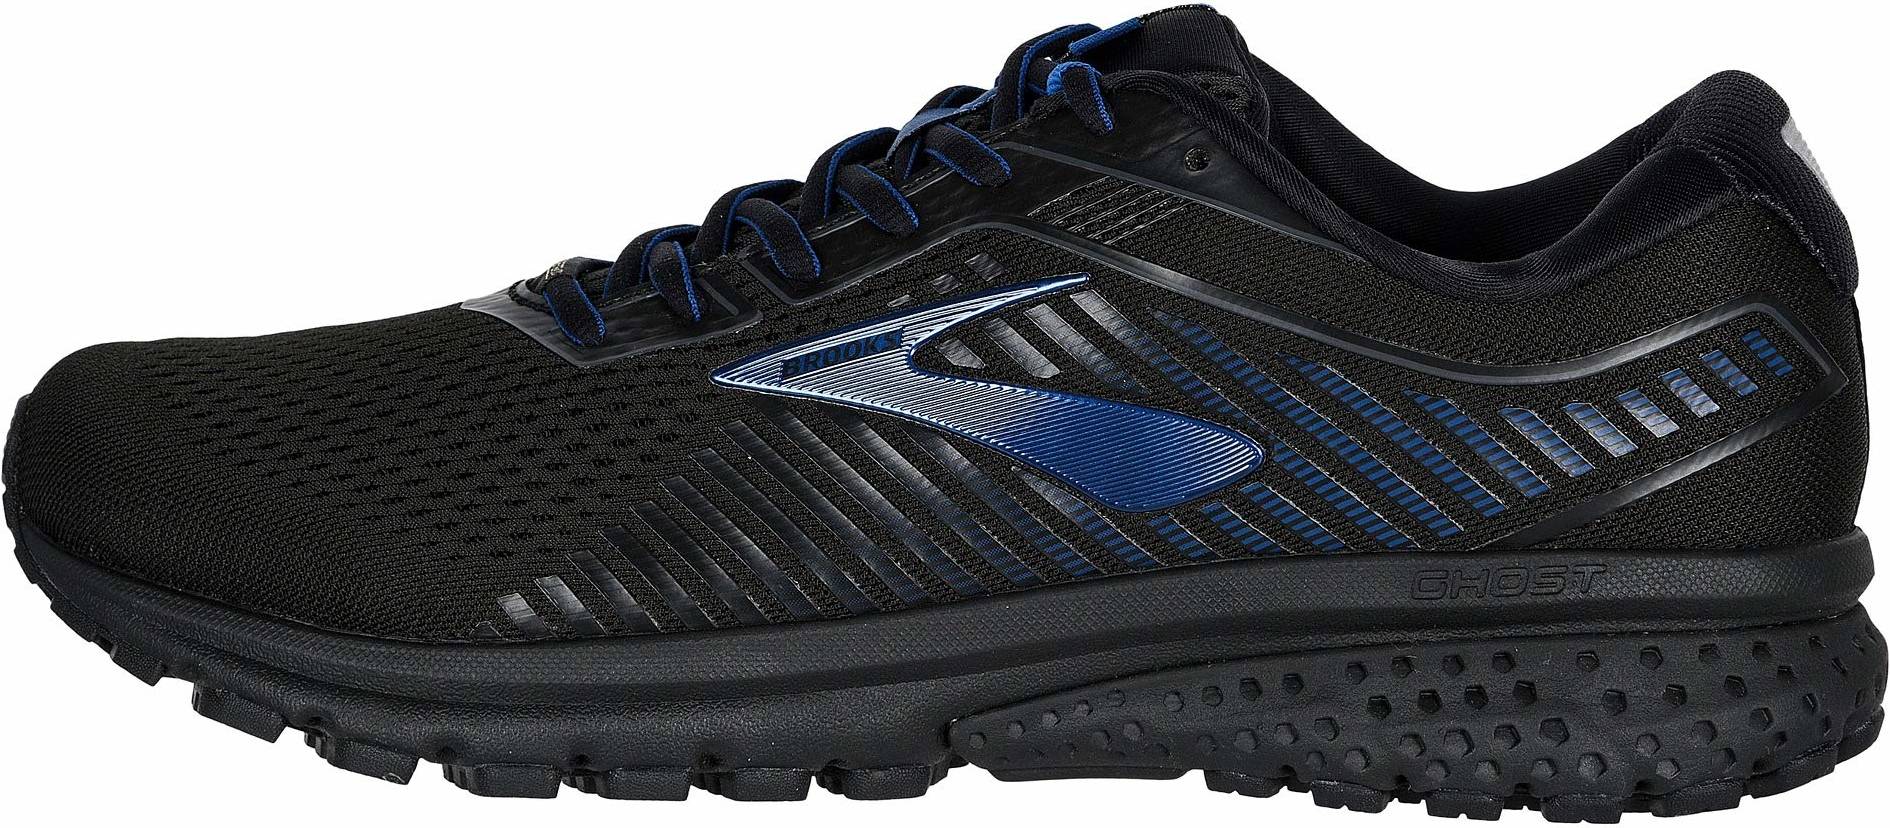 Brooks Ghost 12 GTX Review 2022, Facts, Deals | RunRepeat